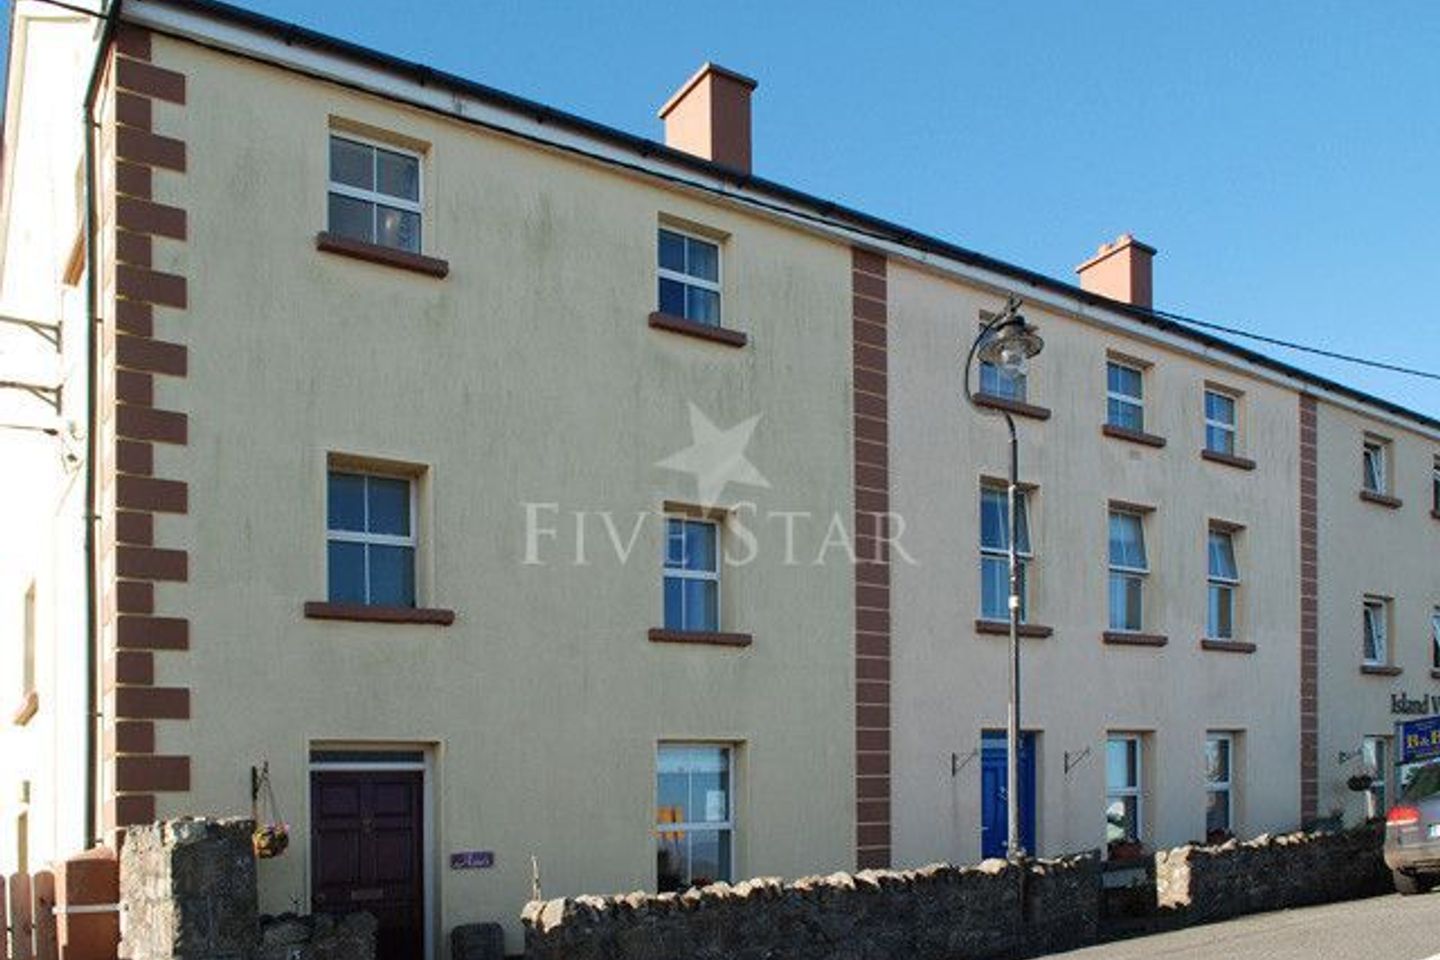 Roundstone Townhouse, Roundstone, Co. Galway